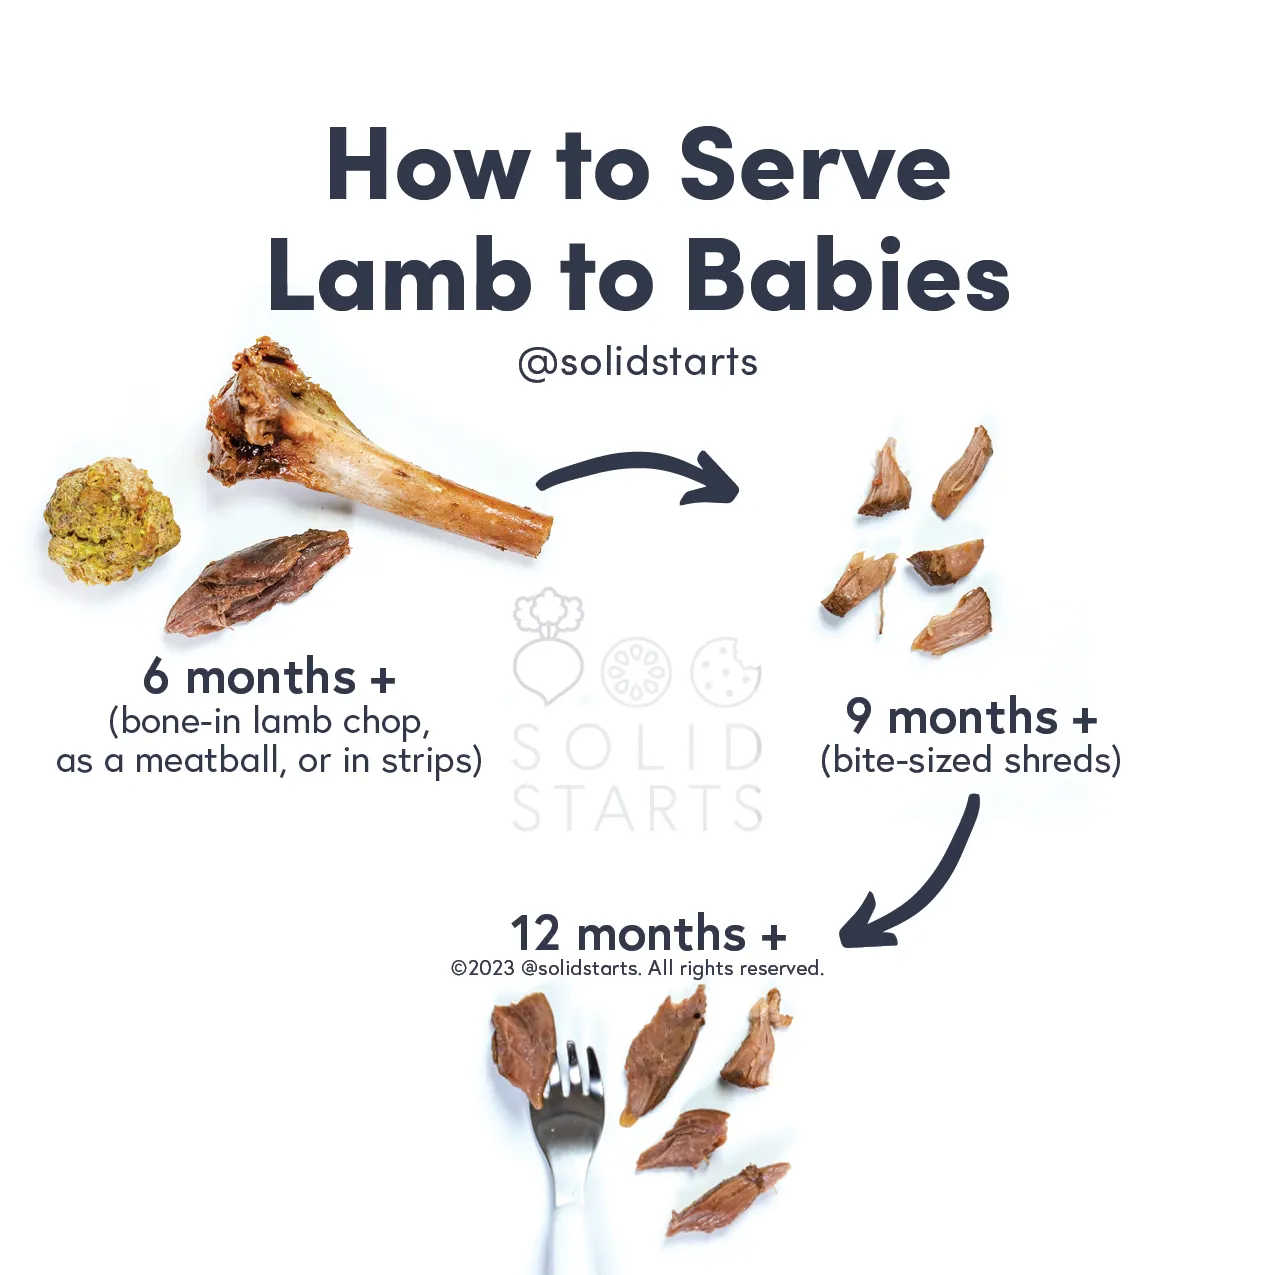 a Solid Starts infographic with the header How to Serve Lamb to Babies: a chop bone, long strip, or lamb meatball for 6 months+, bite-sized shreds for 9 months+, and bite-sized shreds with a utensil for 12 months+